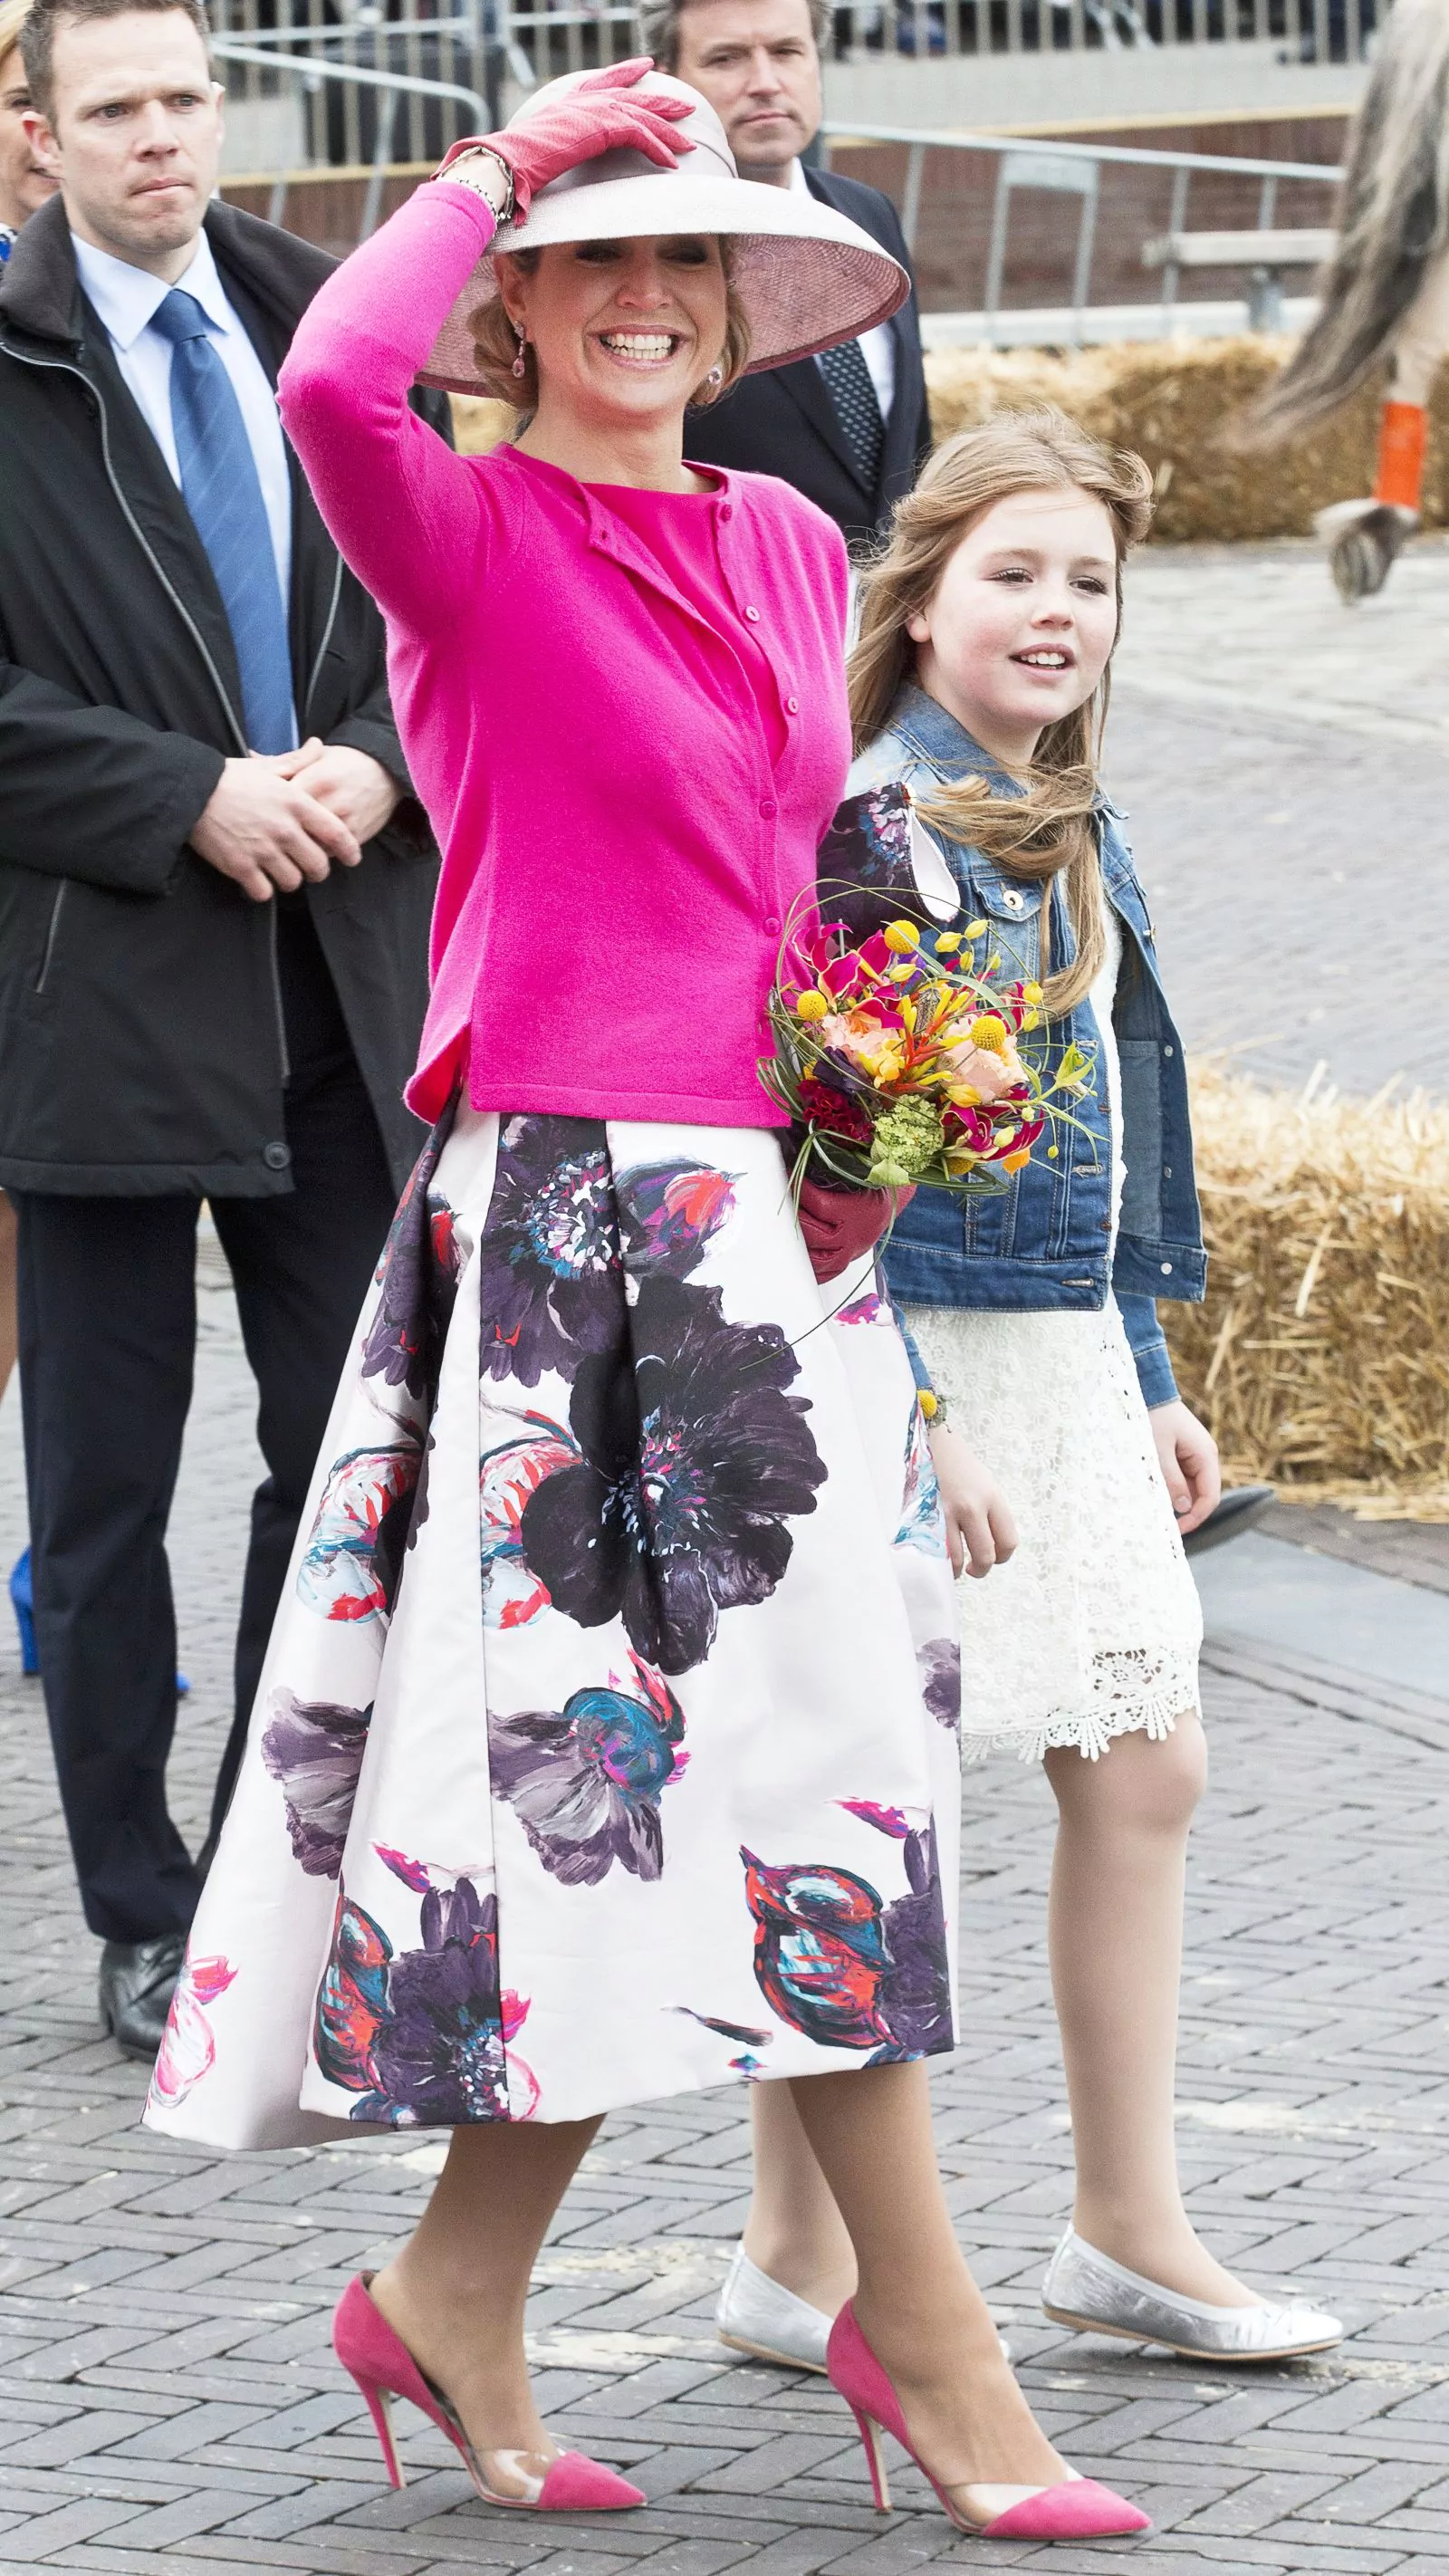 Queen Maxima with her daughter Princess Alexia at the King's Day celebrations in Zwolle, the Netherlands, April 27, 2016.